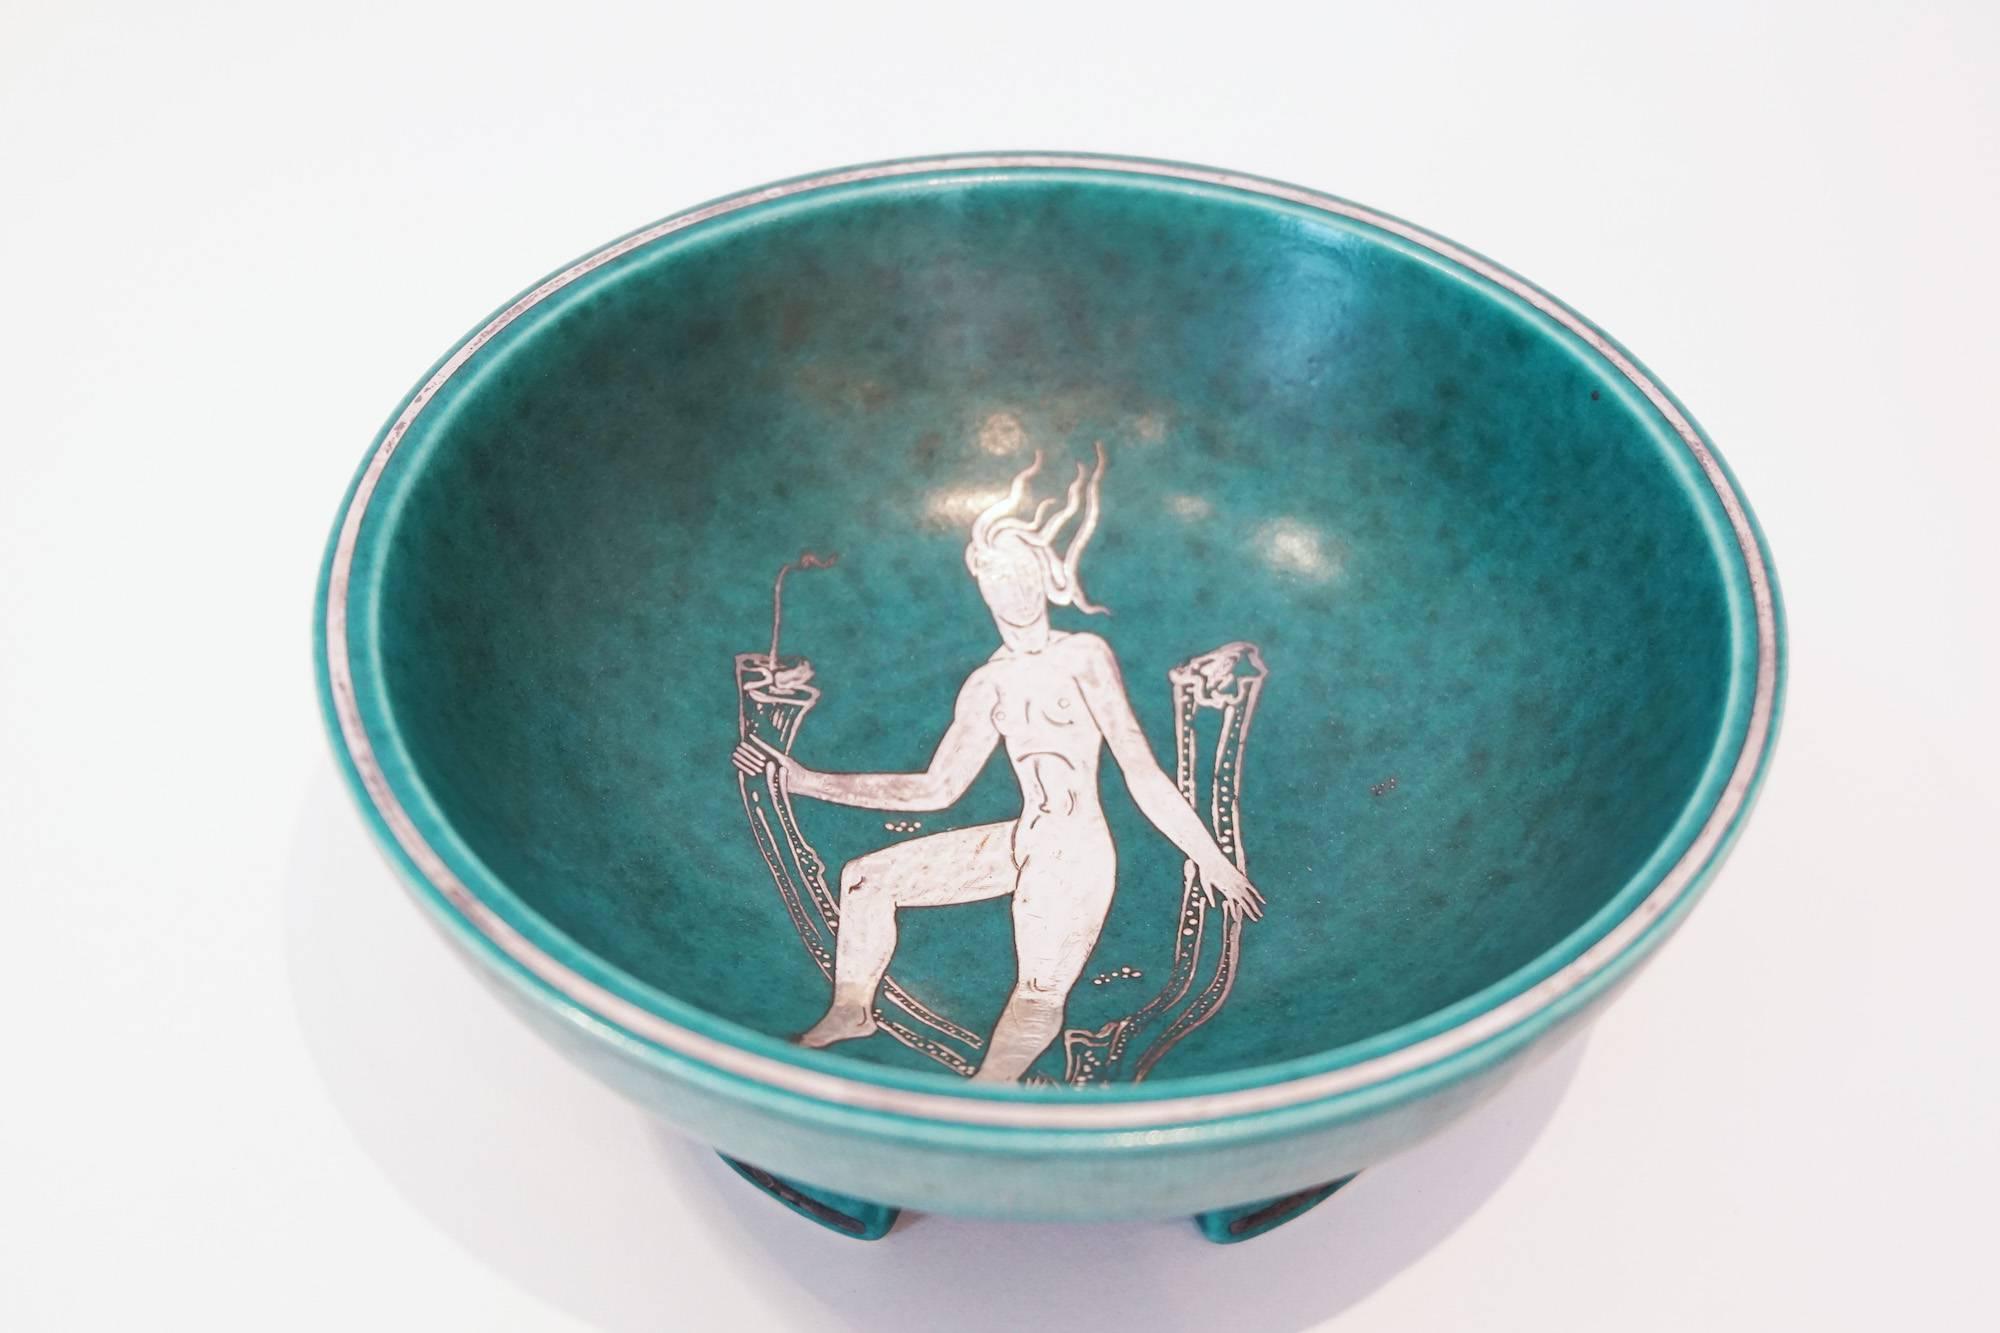 Wilhelm Kage argenta series "nude goddess" plate for Gustavsberg.

Though best known as one of Sweden's greatest ceramists, Wilhelm Kåge (1889-1960) began as a painter, studying in Paris under Henri Matisse. When he returned to